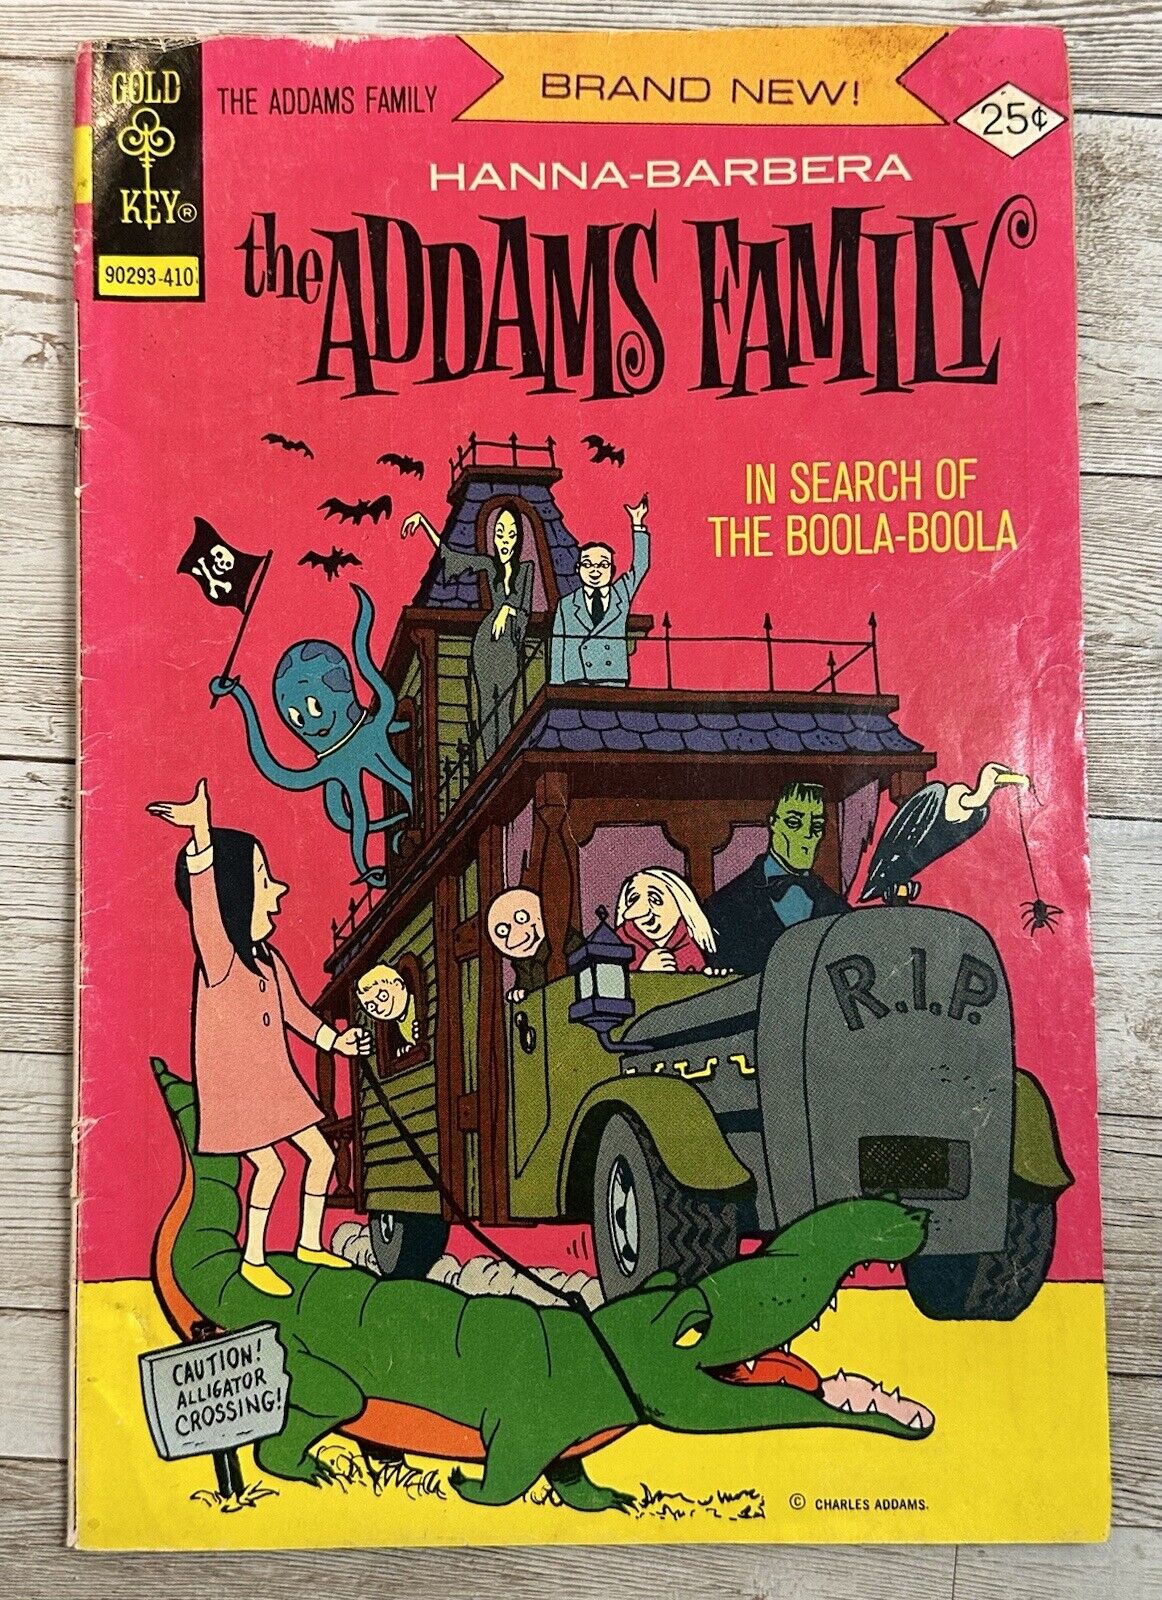 RARE The Addams Family #1 (1974) GOLD KEY 90293-410 Wednesday Intro Book VG-/+